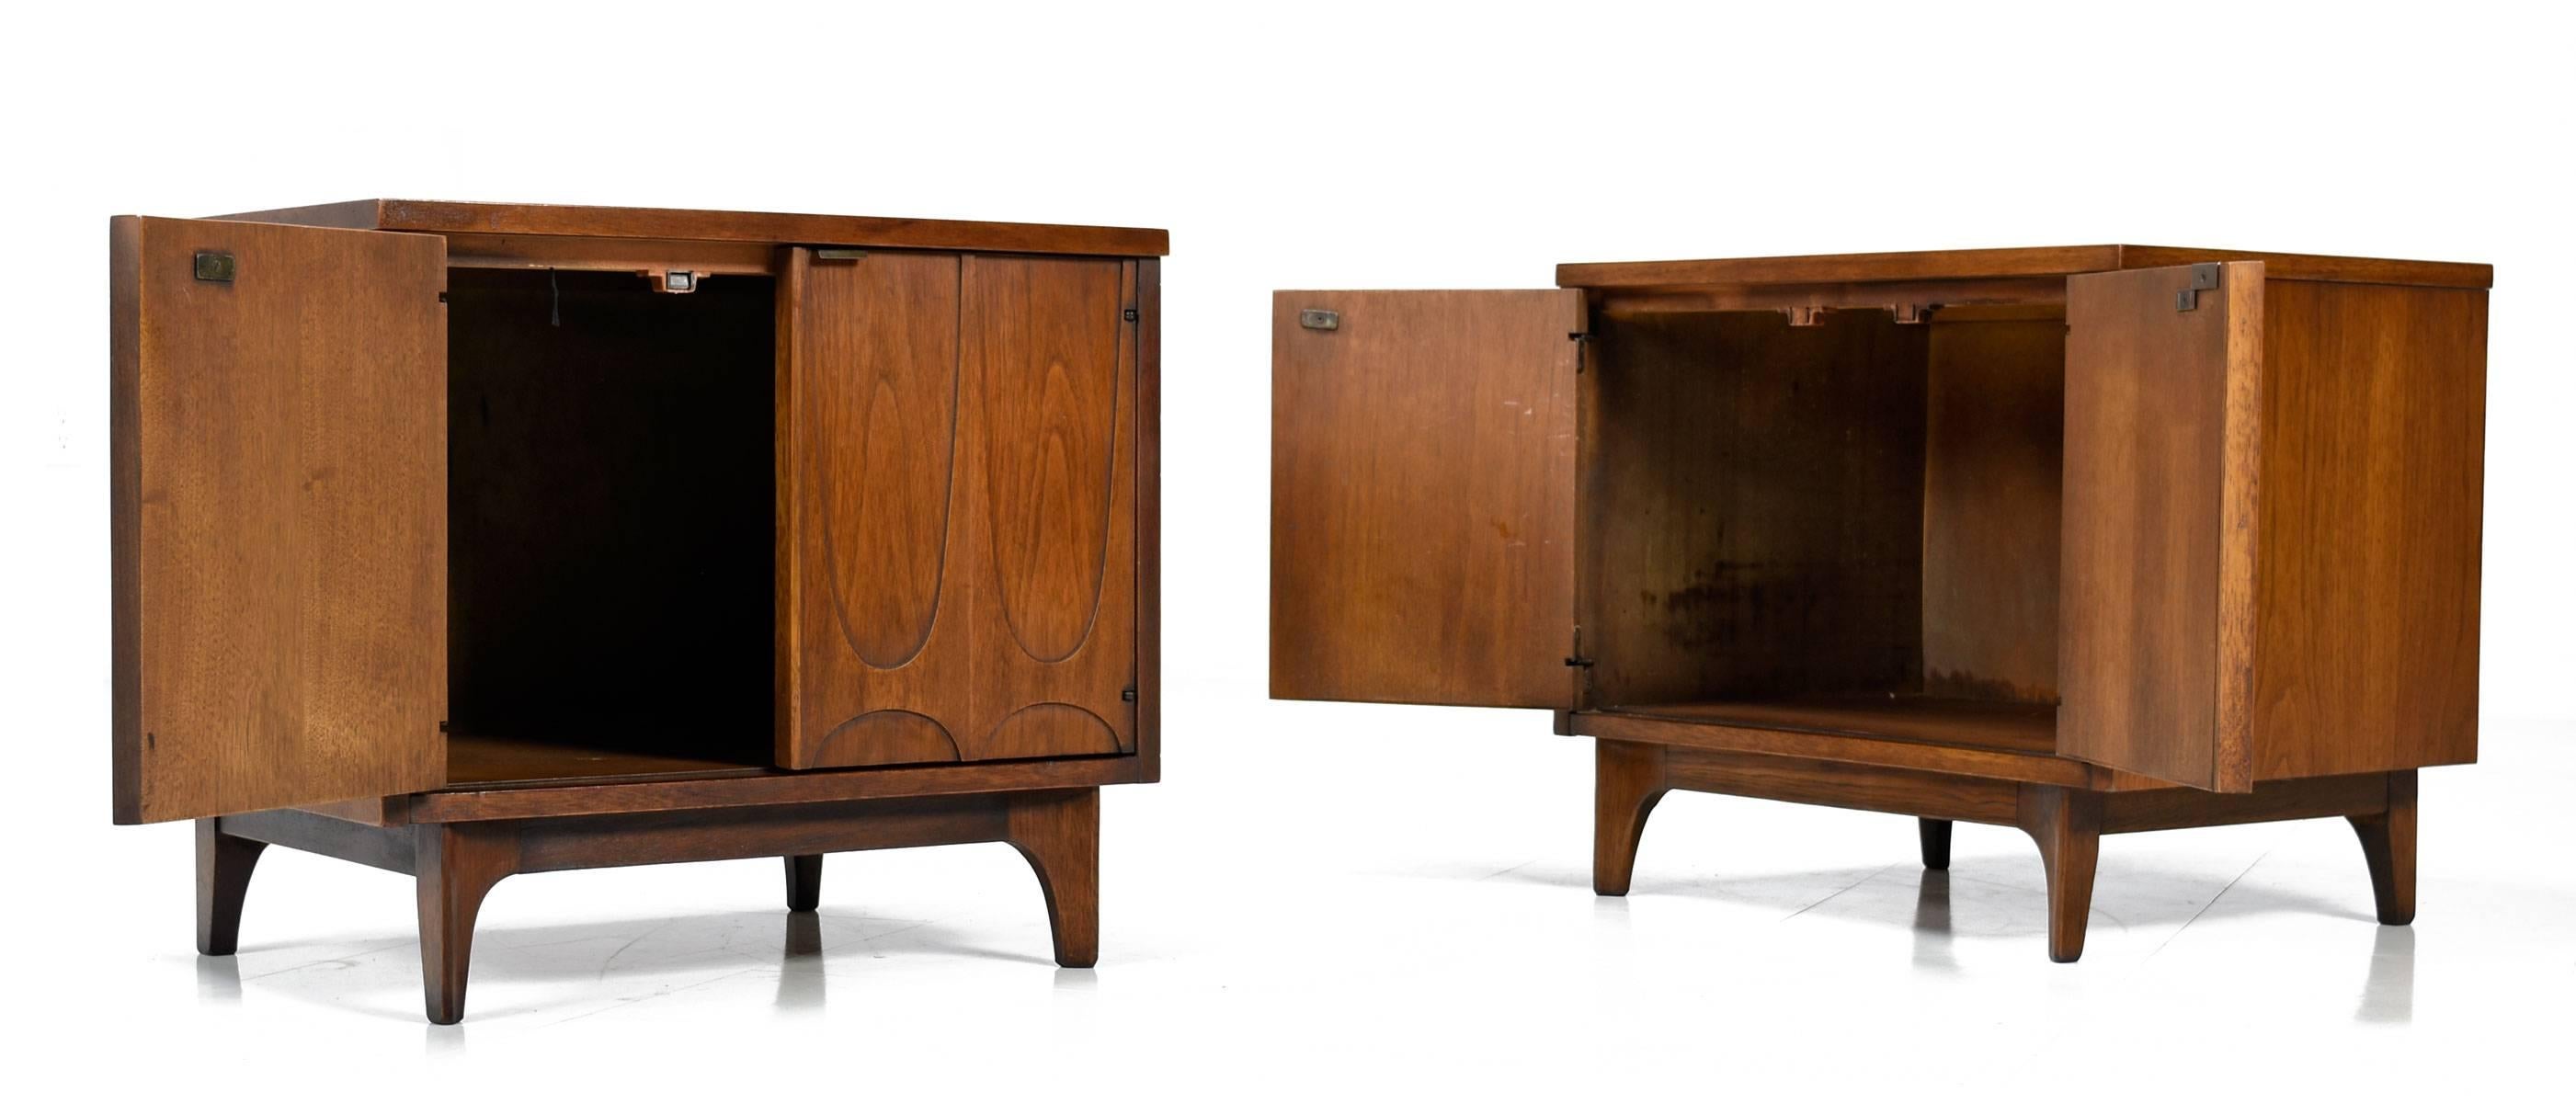 Retro 1960s era pair of Broyhill Brasilia commode cabinets. Named such by Broyhill, these 